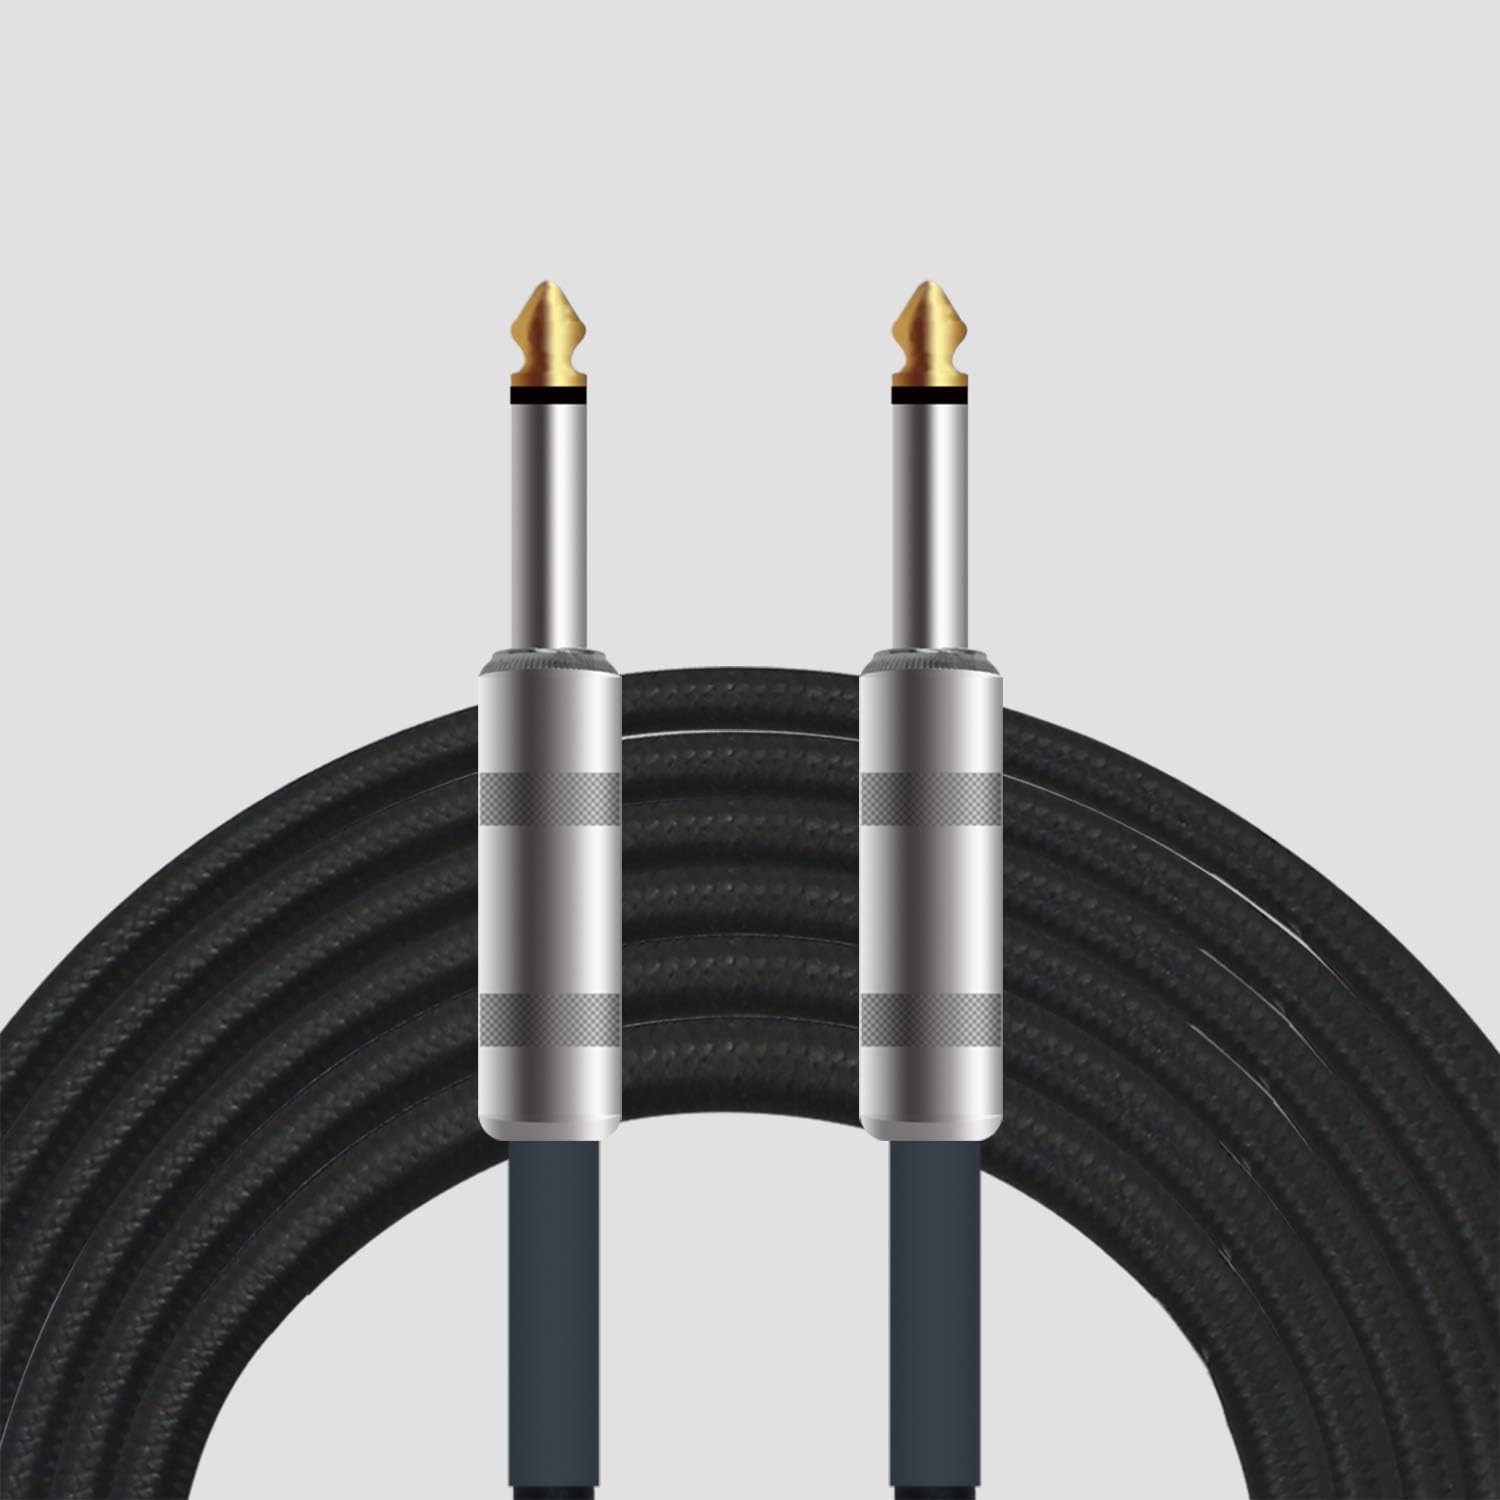 10 Feet Professional Guitar Instrument Cable with Noble Black Tweed Coat Straight 1/4 Inch TS to Straight 1/4 Inch TS